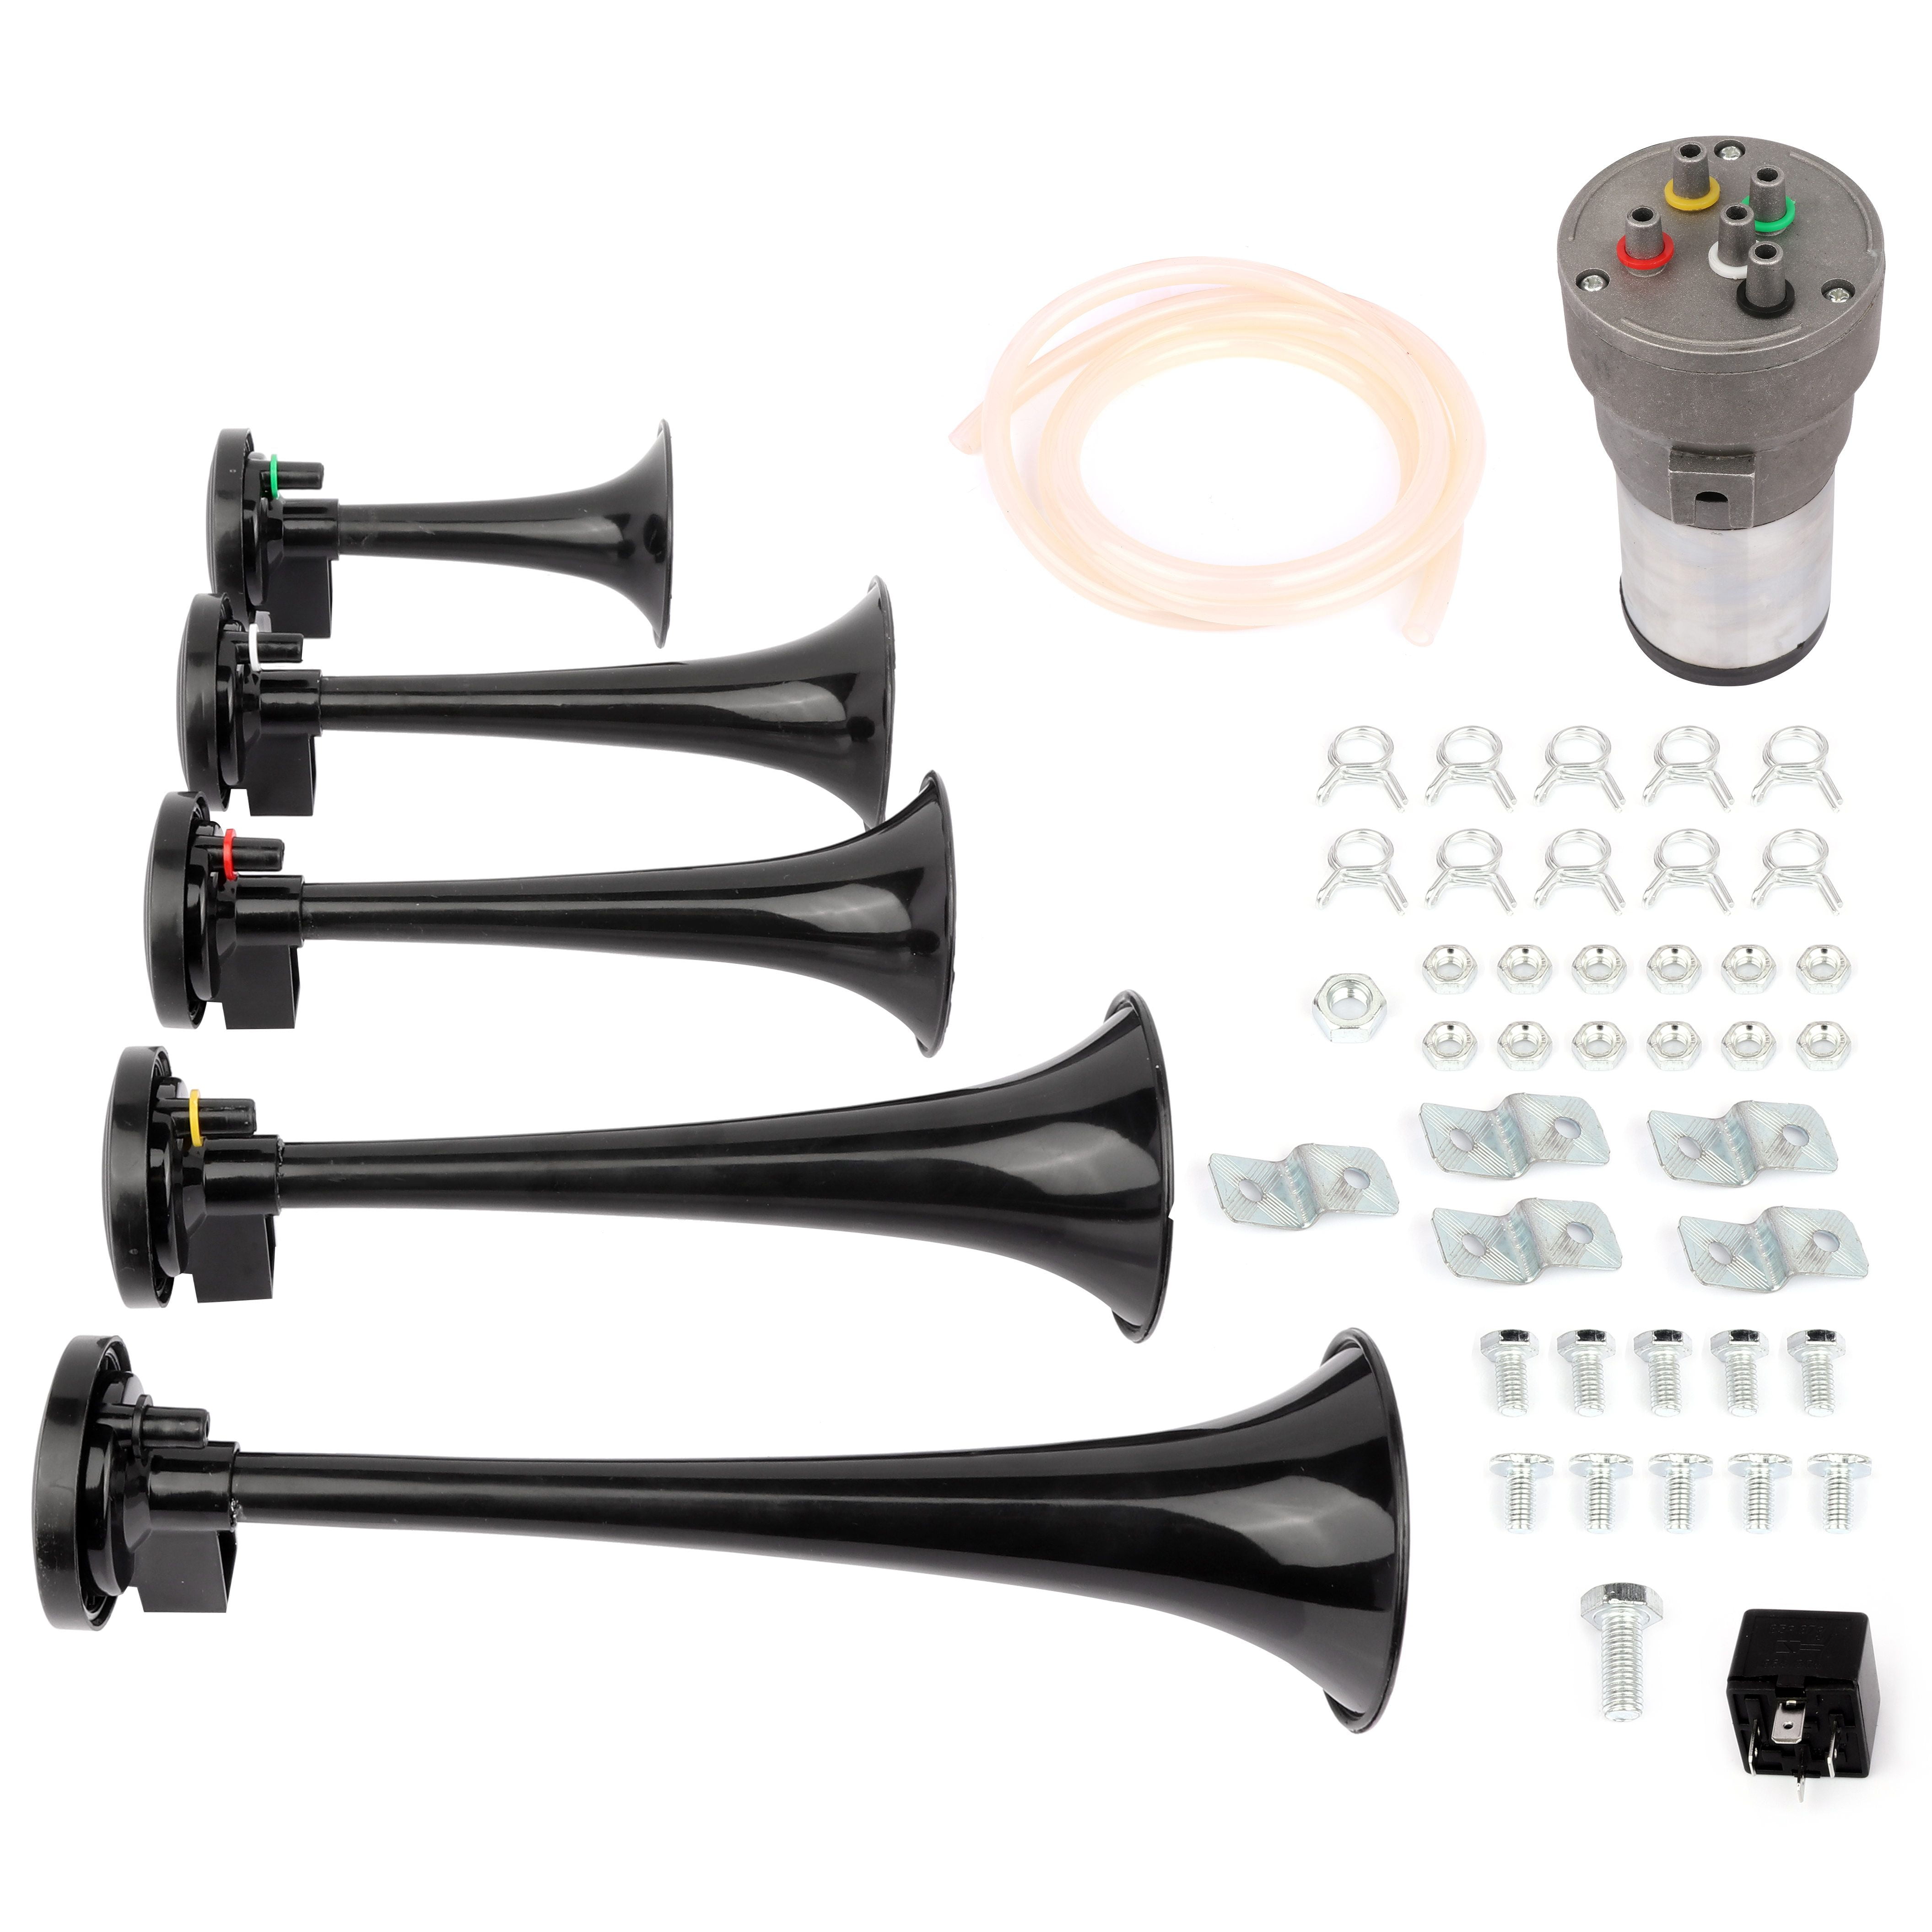 5 Trumpet Horn Kit with Compressor Loud Train Horn Dixie Musical Air  Horn12V 105db, Dixie Musical Air Horn Plastic(black) , Electric Trains  Horns for Any 12V Vehicles 